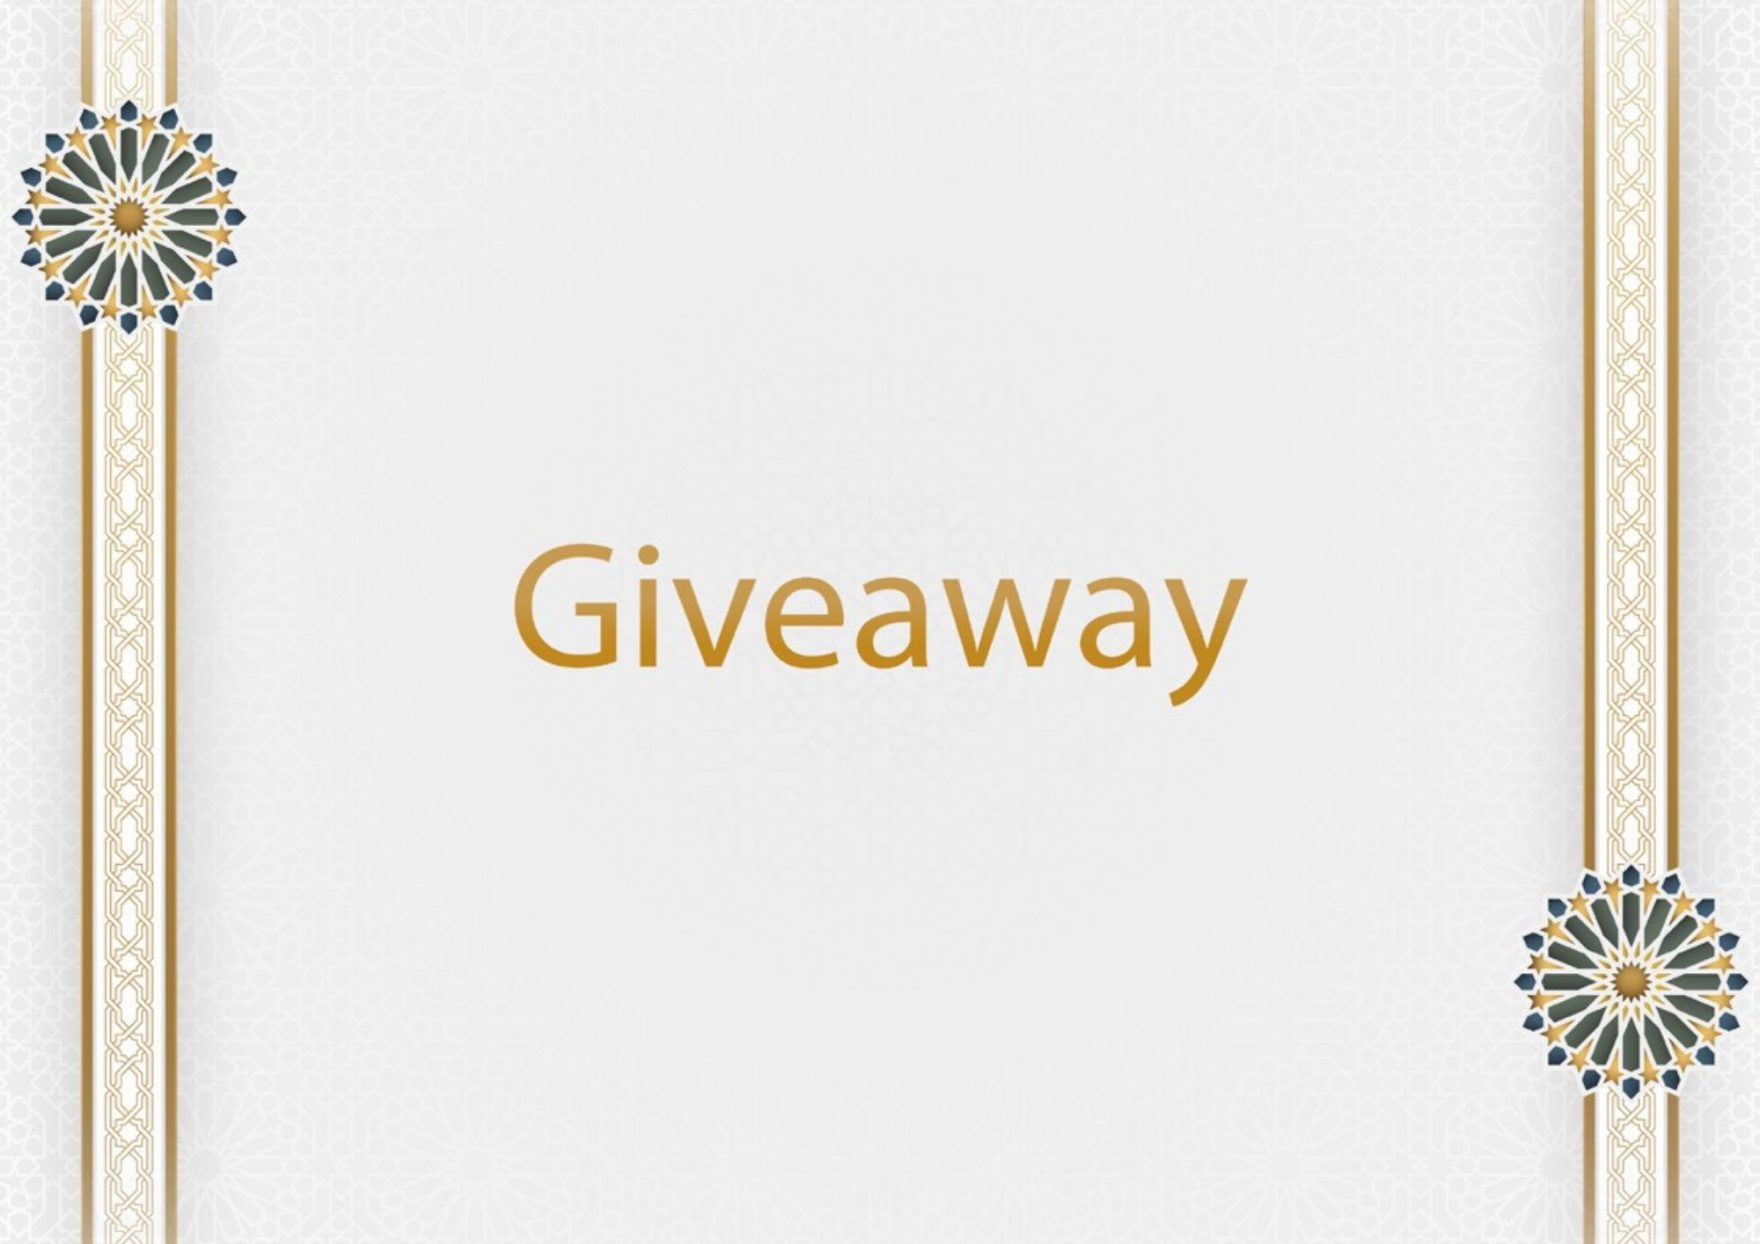 Giveaway Items